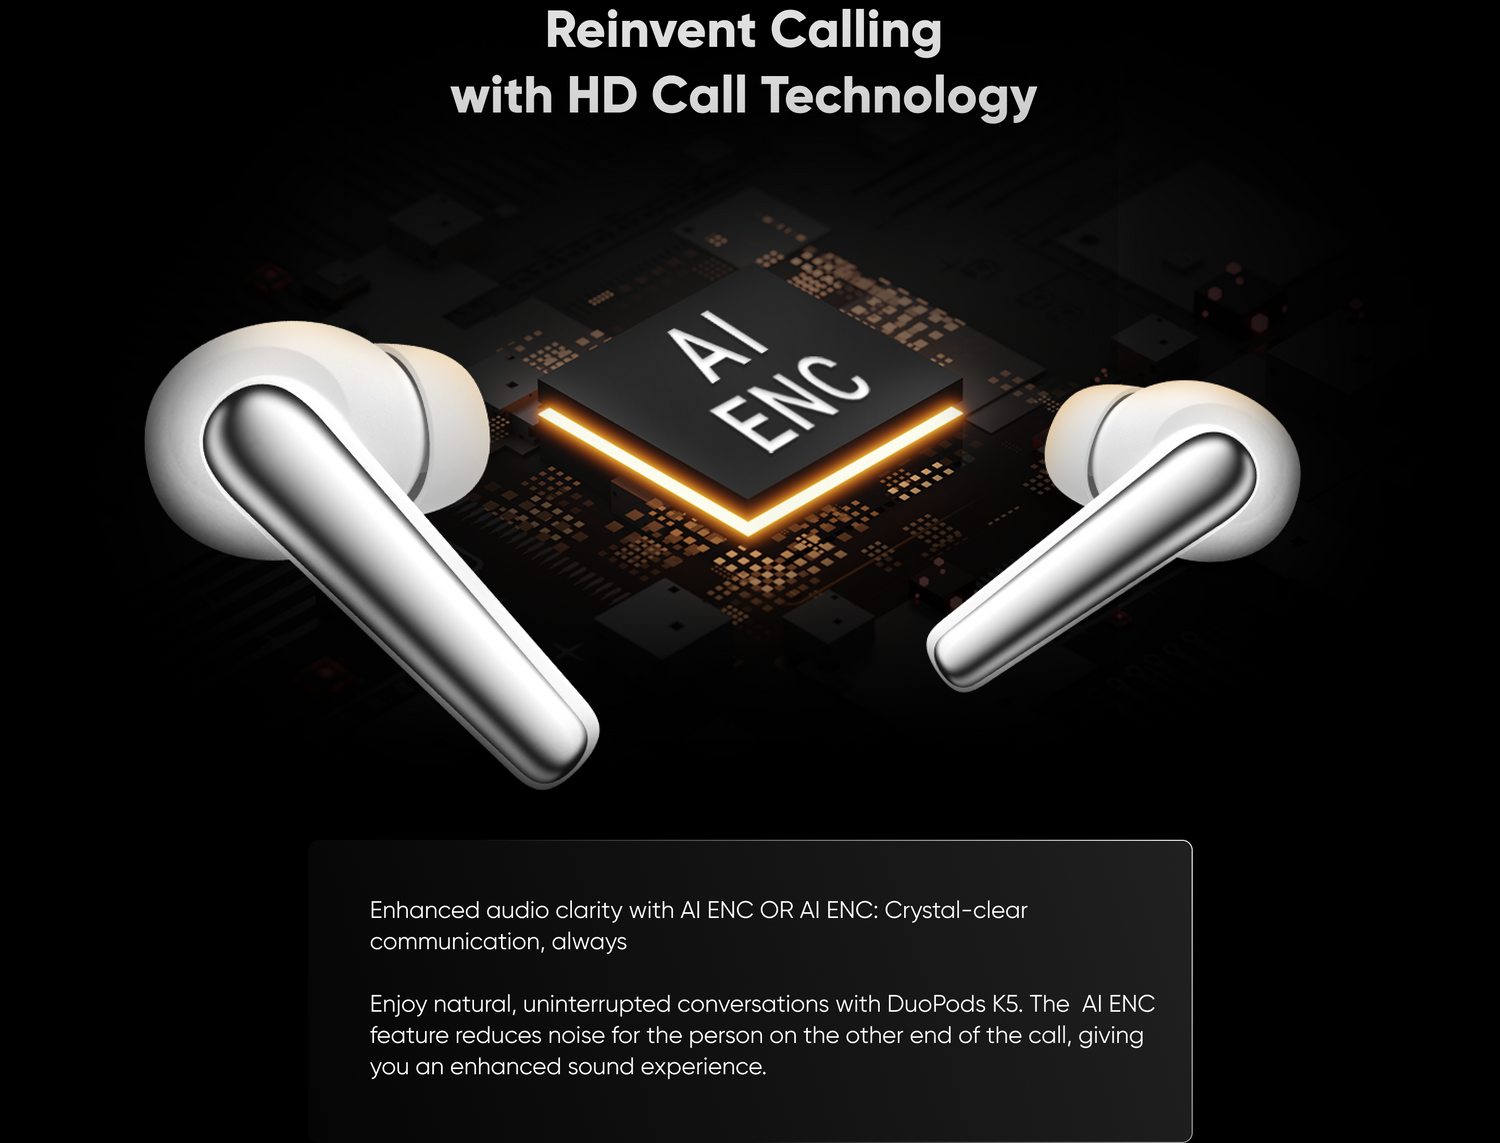 Enhanced audio clarity with Al ENC OR Al ENC: Crystal-clear communication, always
Enjoy natural, uninterrupted conversations with DuoPods KS. The Al ENCfeature reduces noise for the person on the other end of the call, giving you an enhanced sound experience.
Reinvent Calling with HD Call Technology